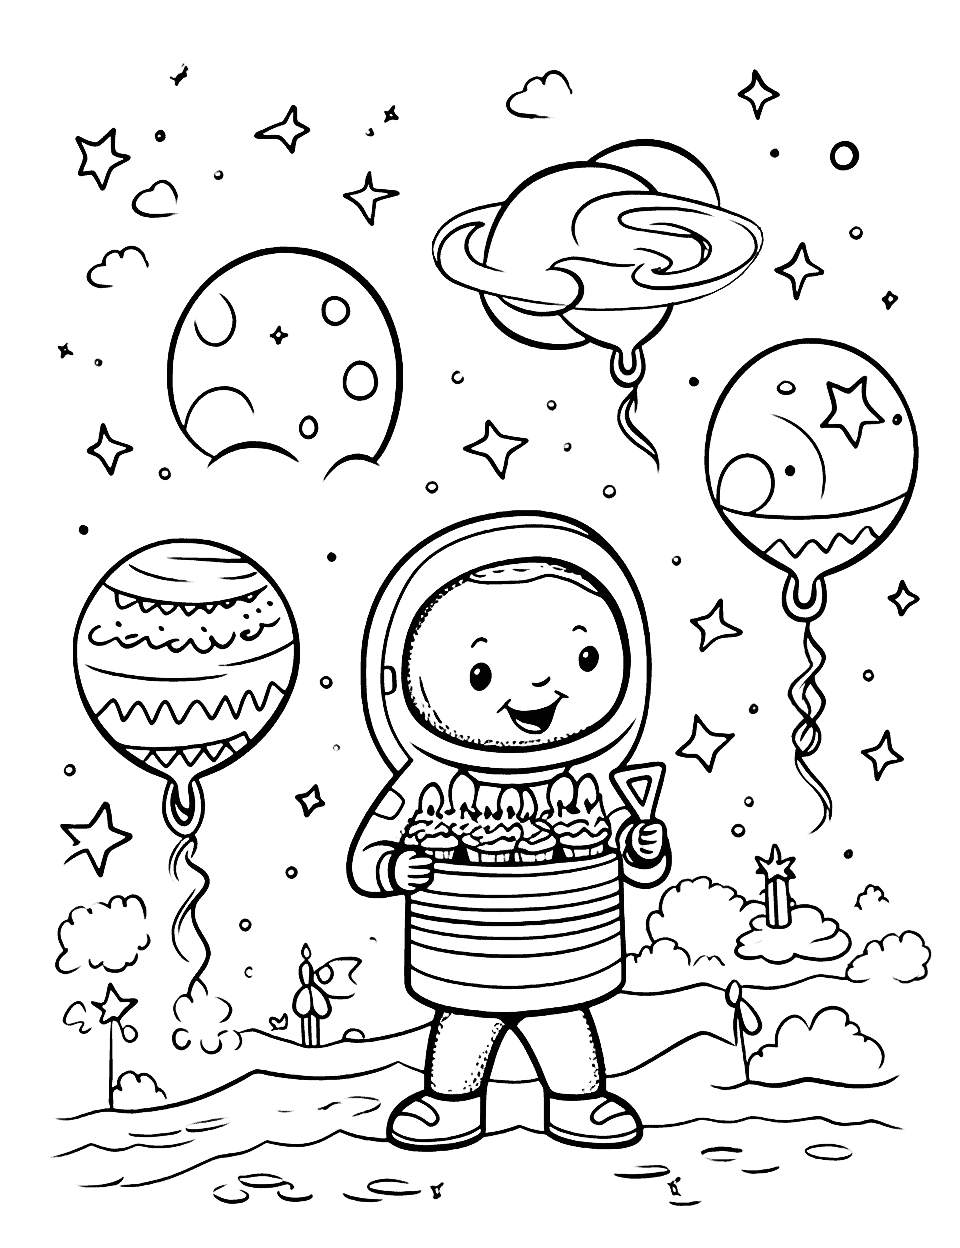 Space Explorer's Birthday Happy Coloring Page - A young astronaut celebrating their birthday on the moon.